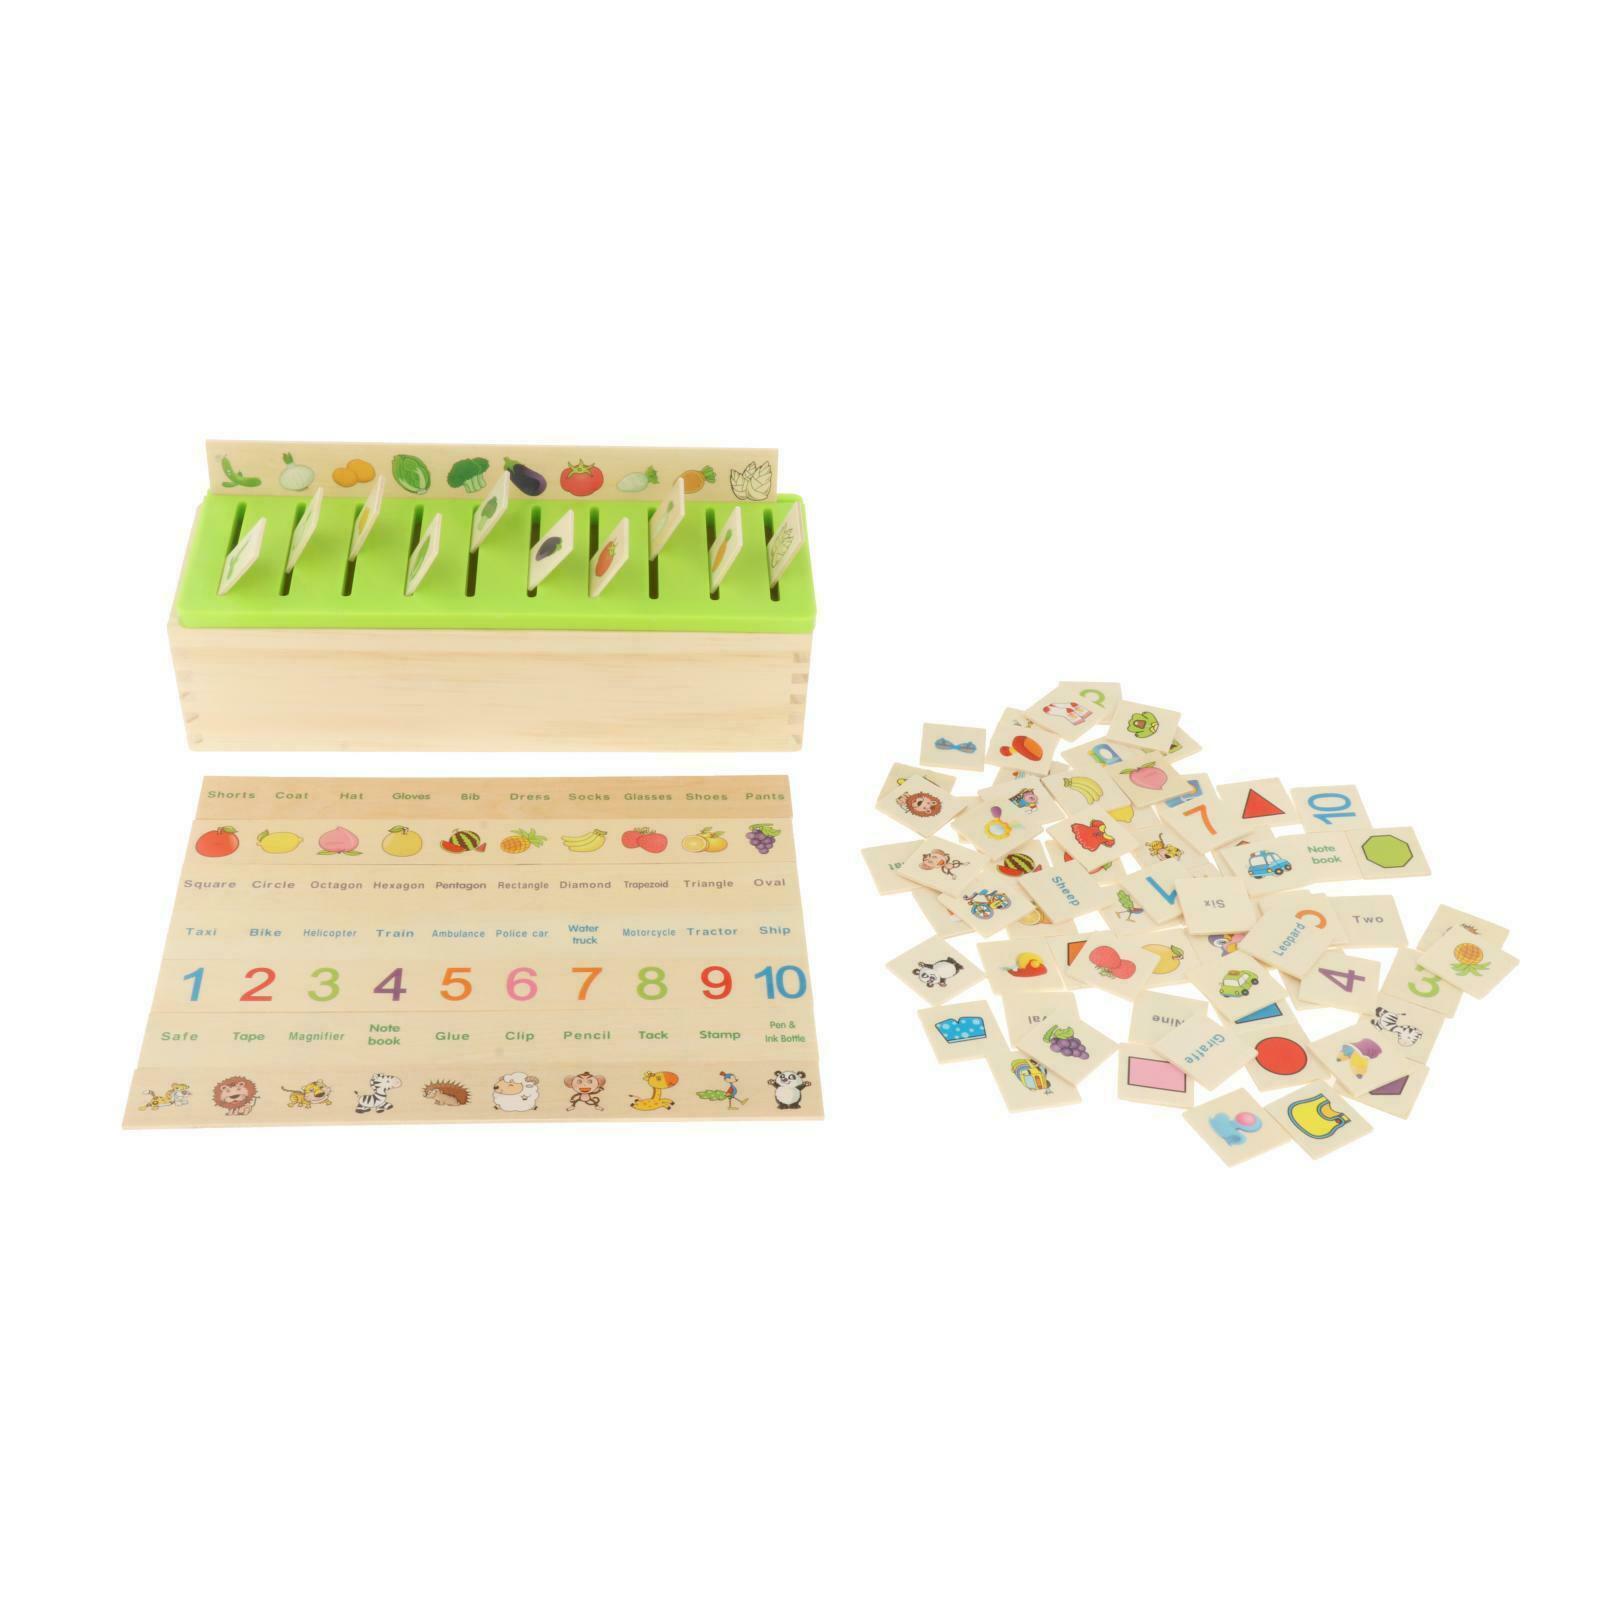 Wooden Puzzle Sorting Toys w/ Sorting Lid Learning Game for Toddlers Kids